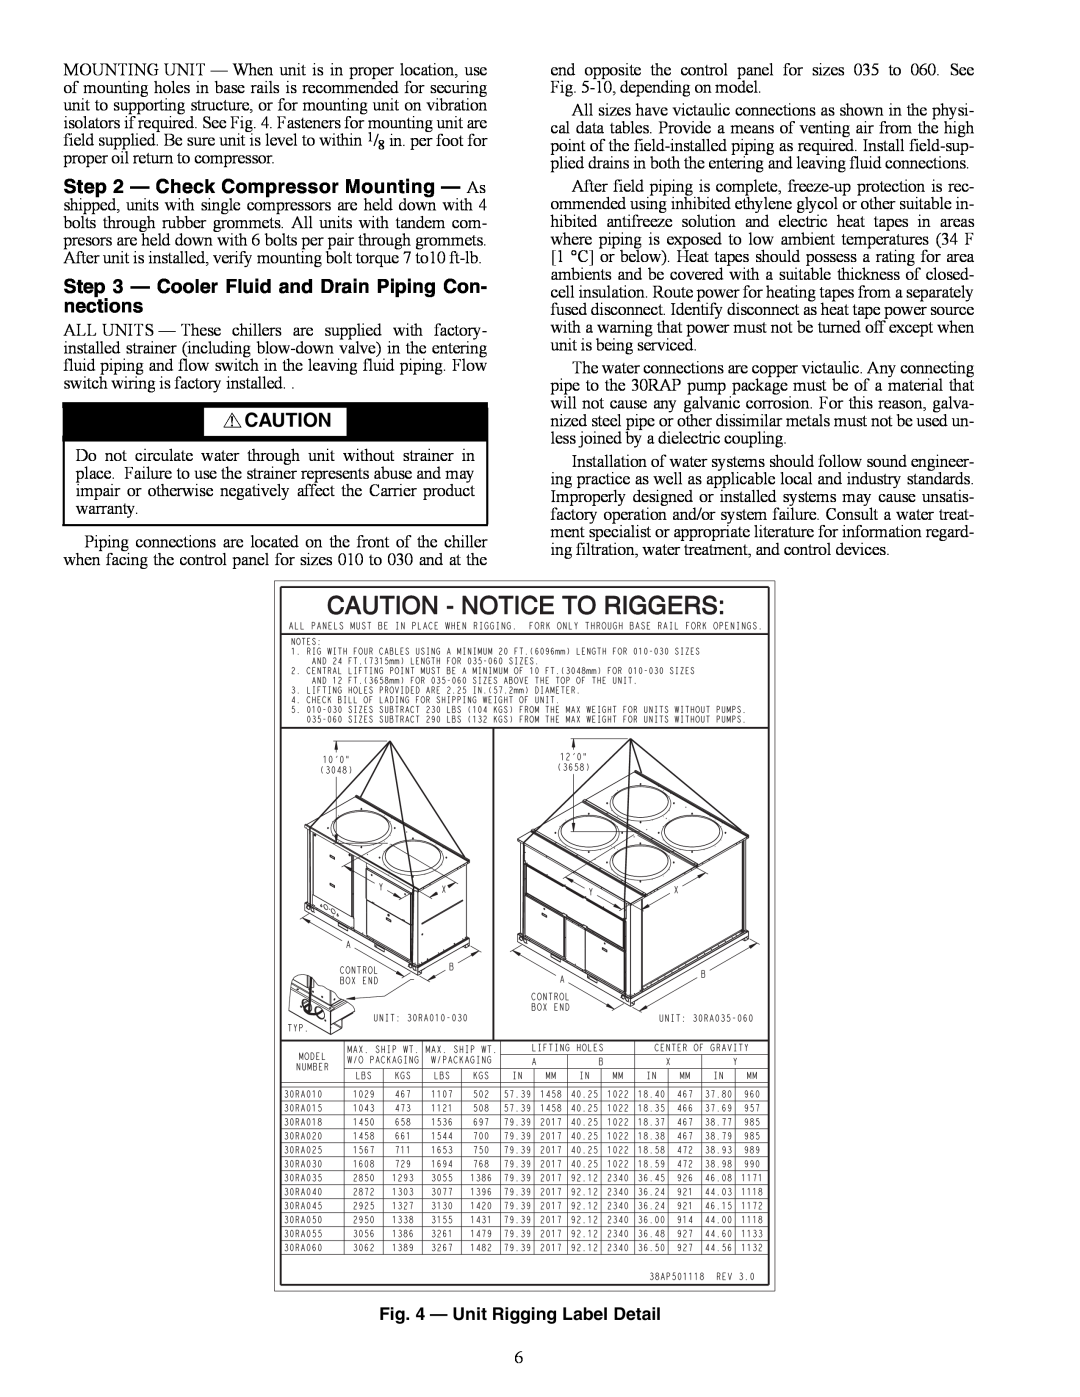 Carrier 30RAP010-060 installation instructions Check Compressor Mounting - As, a30-4916, Unit Rigging Label Detail 